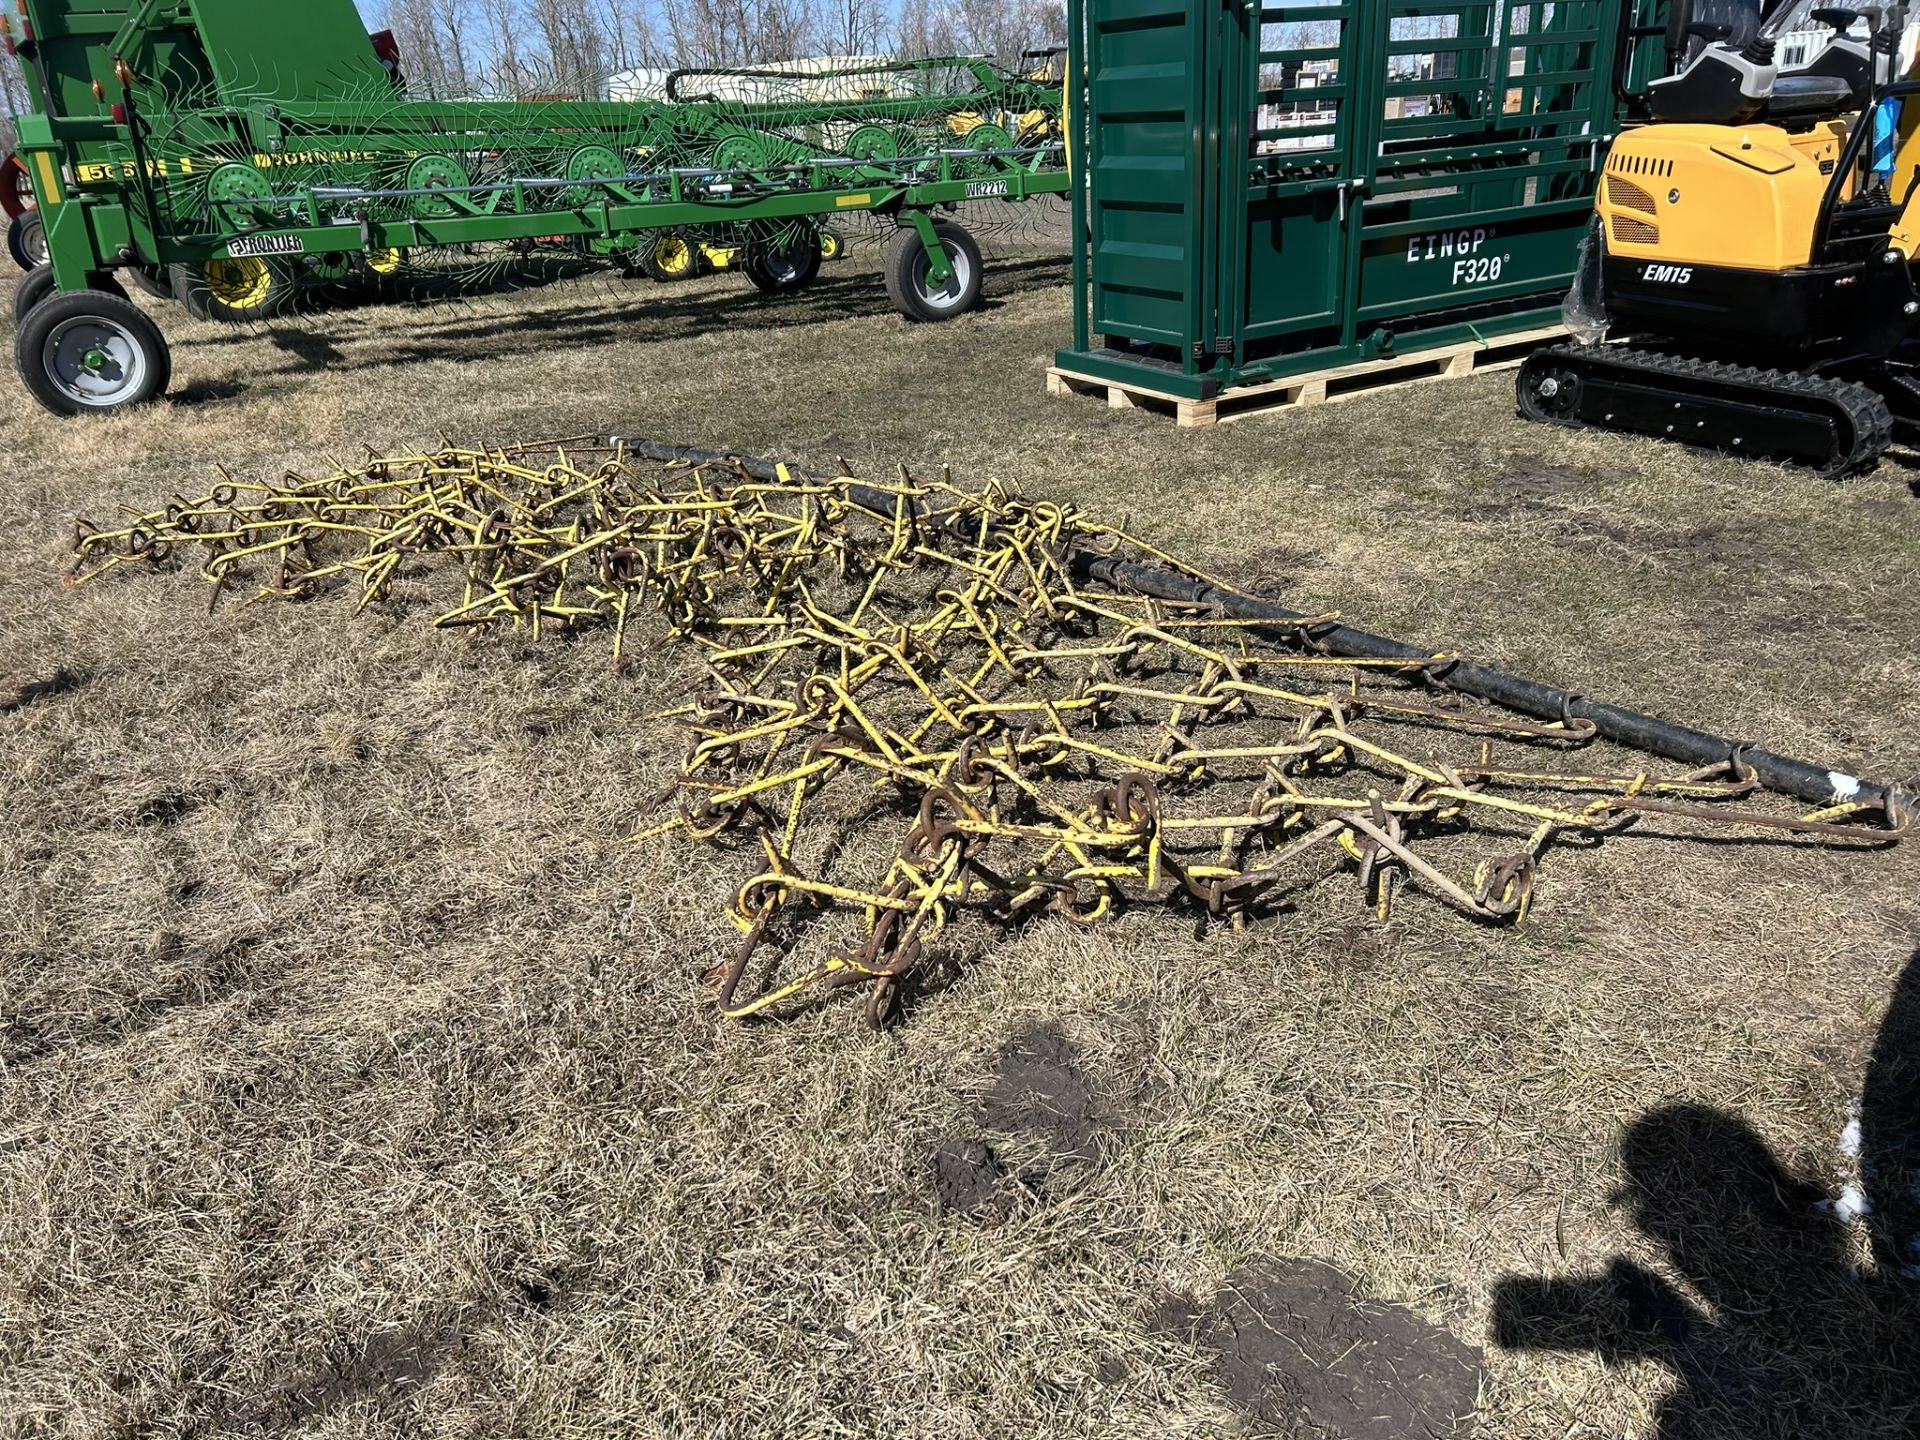 SET OF PASTURE CHAIN HARROWS W/ DRAW BAR - 15 FT - Image 3 of 4